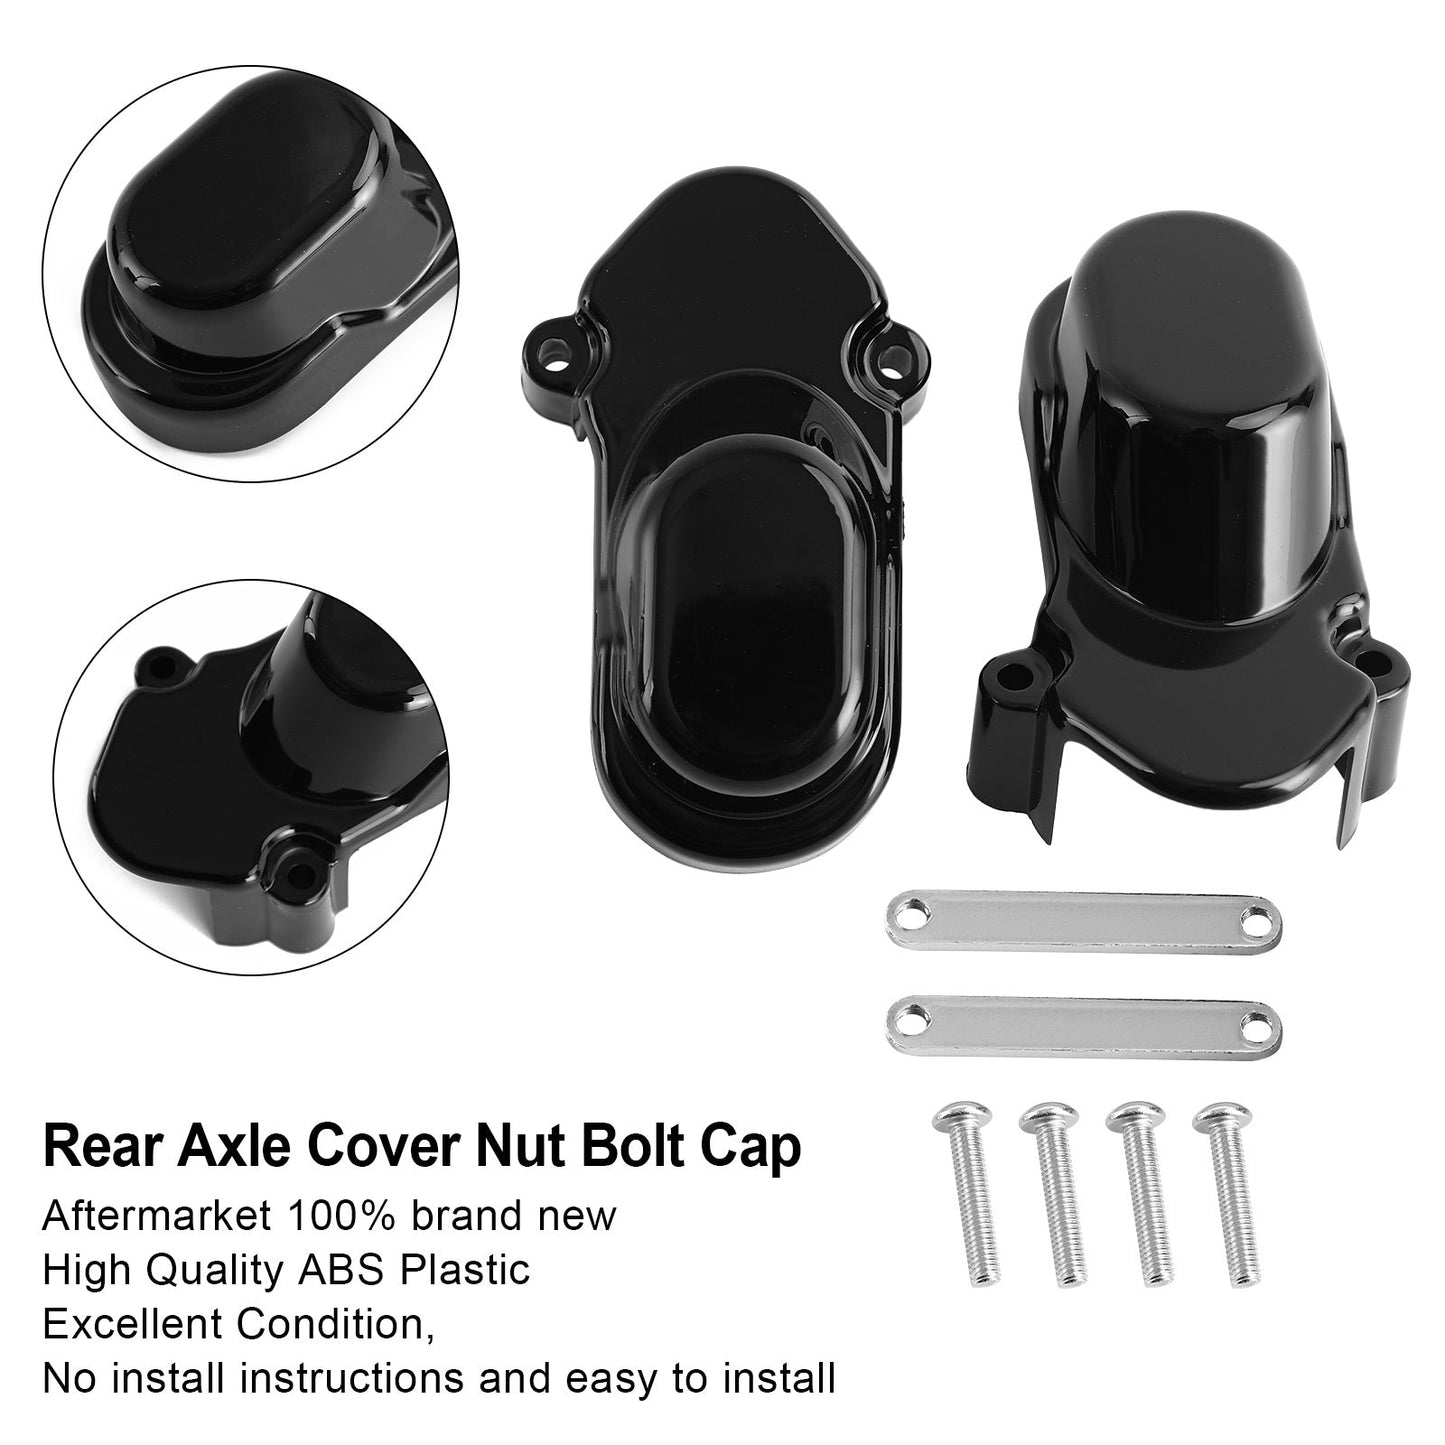 Rear Axle Cover Nut Bolt Cap For Sportster 1200 XL1200C 883 2005-2017 Black